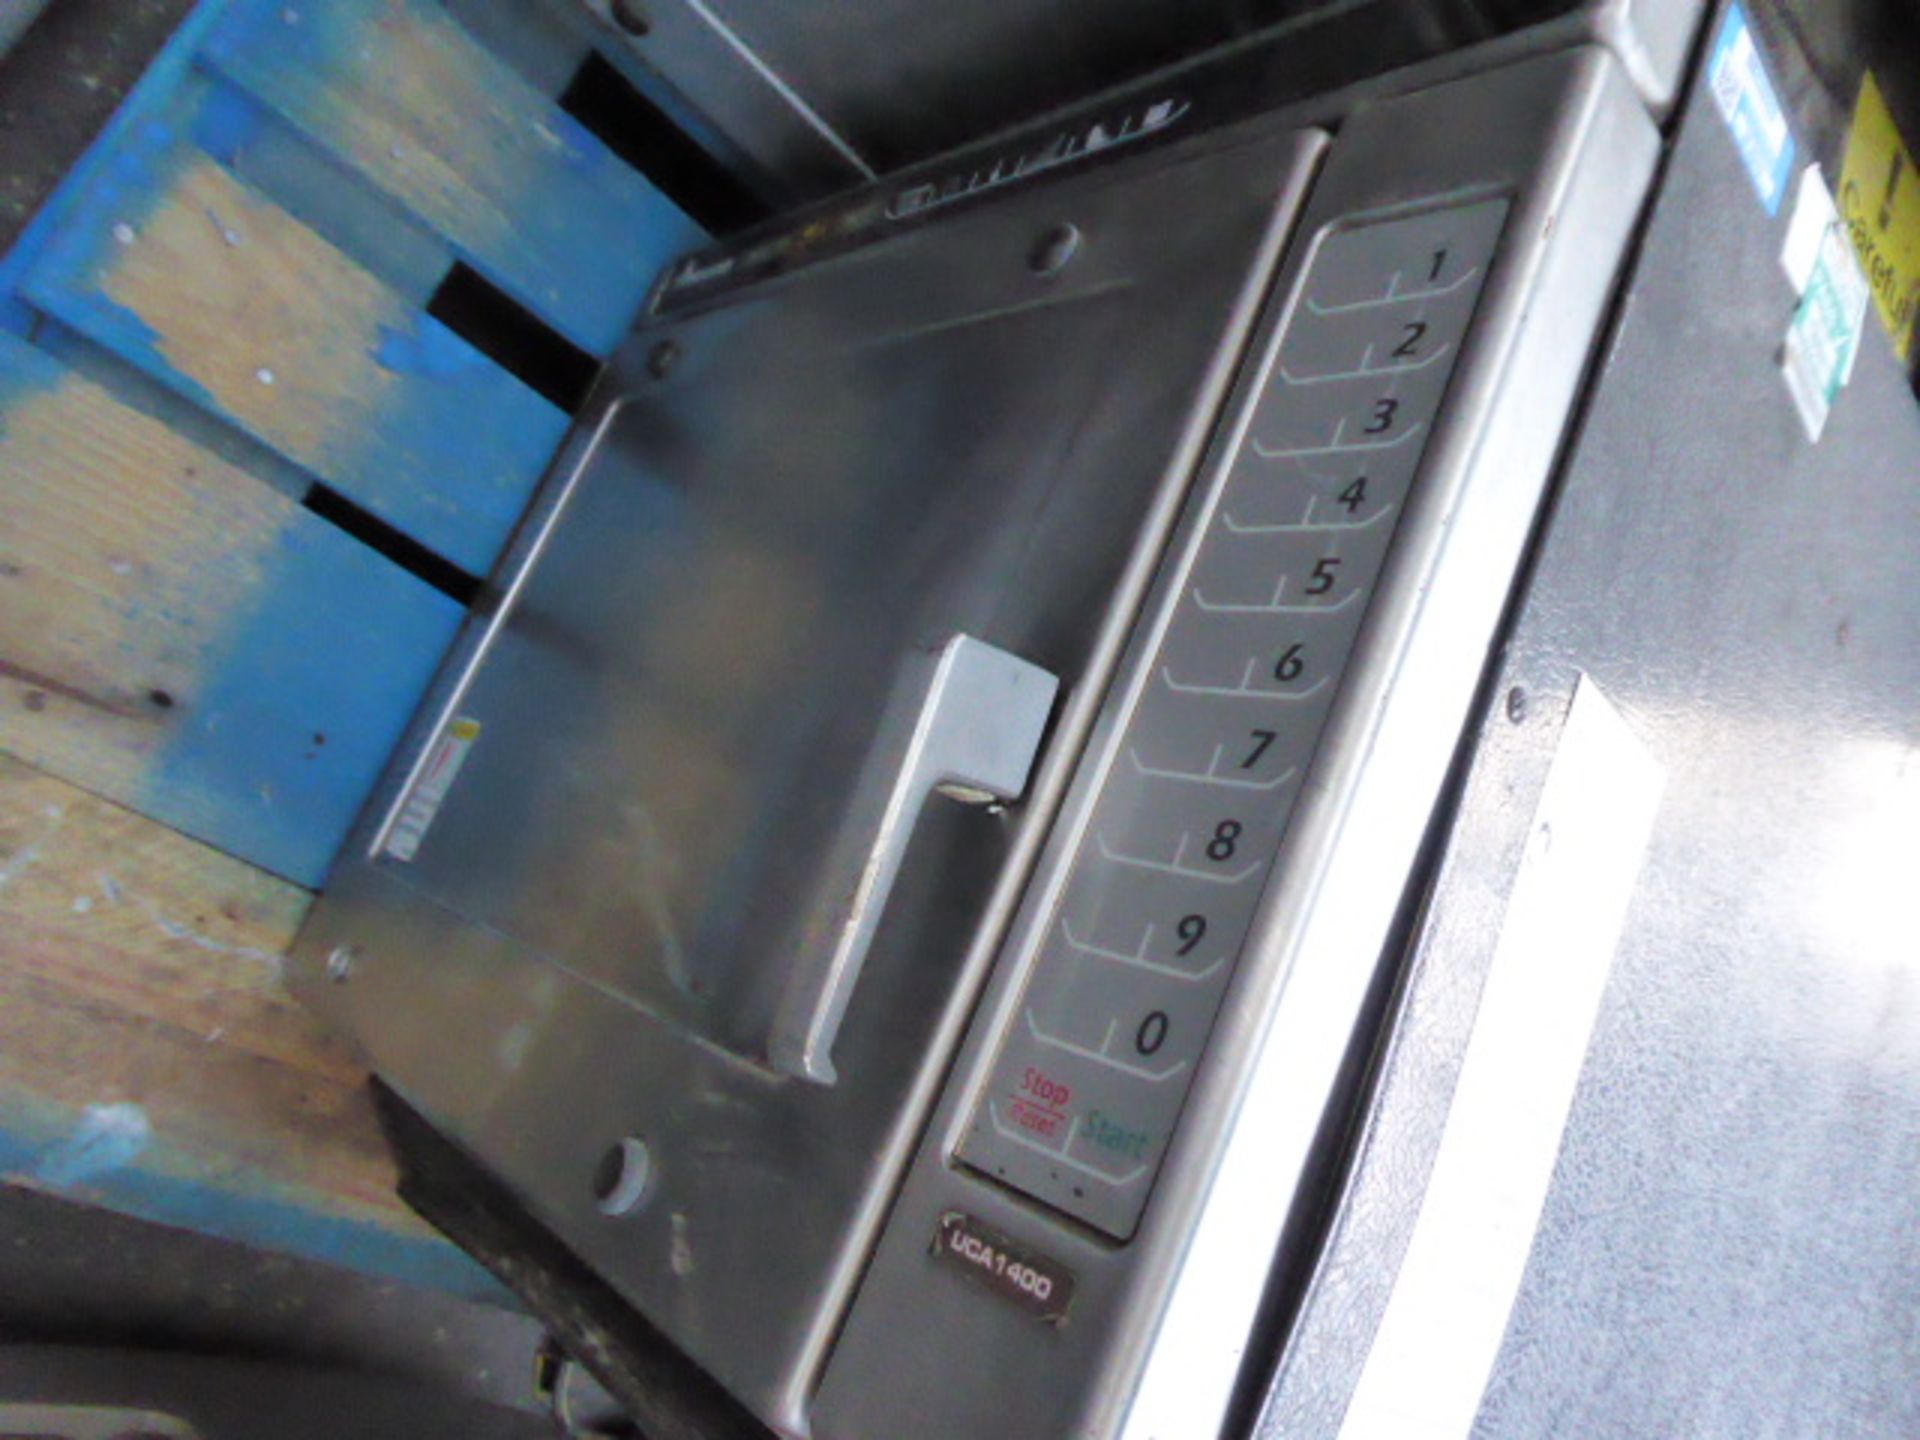 3 50cm commercial microwave ovens (Failed electrical test) - Image 2 of 2